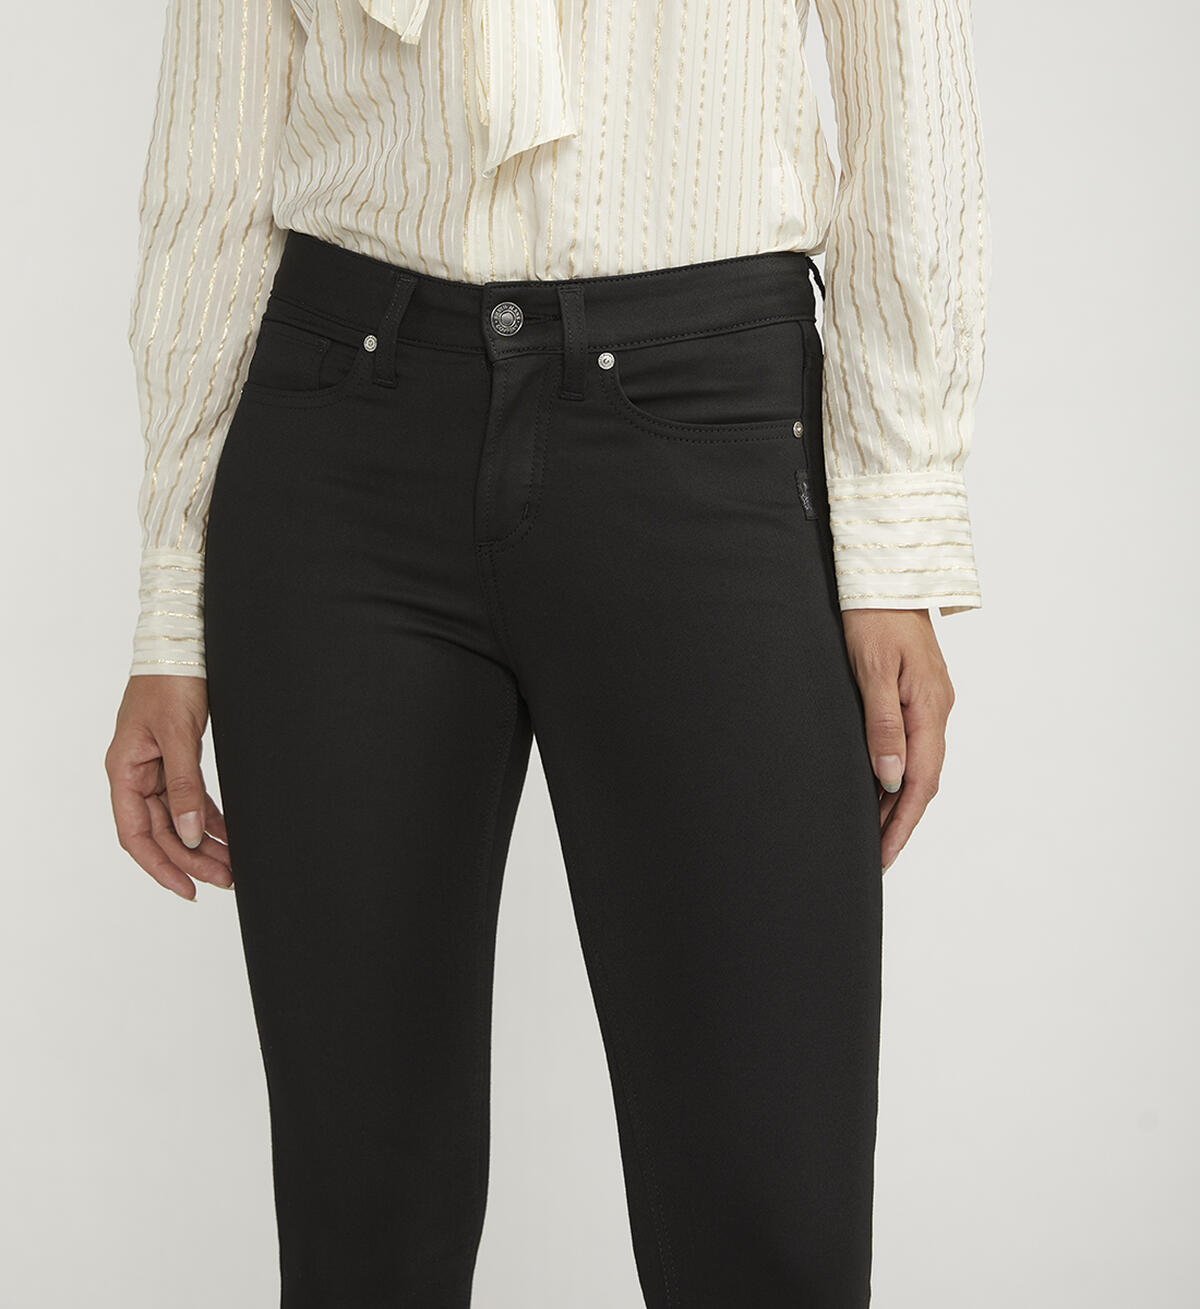 Suki Mid Rise Skinny Ankle Jeans, , hi-res image number 3